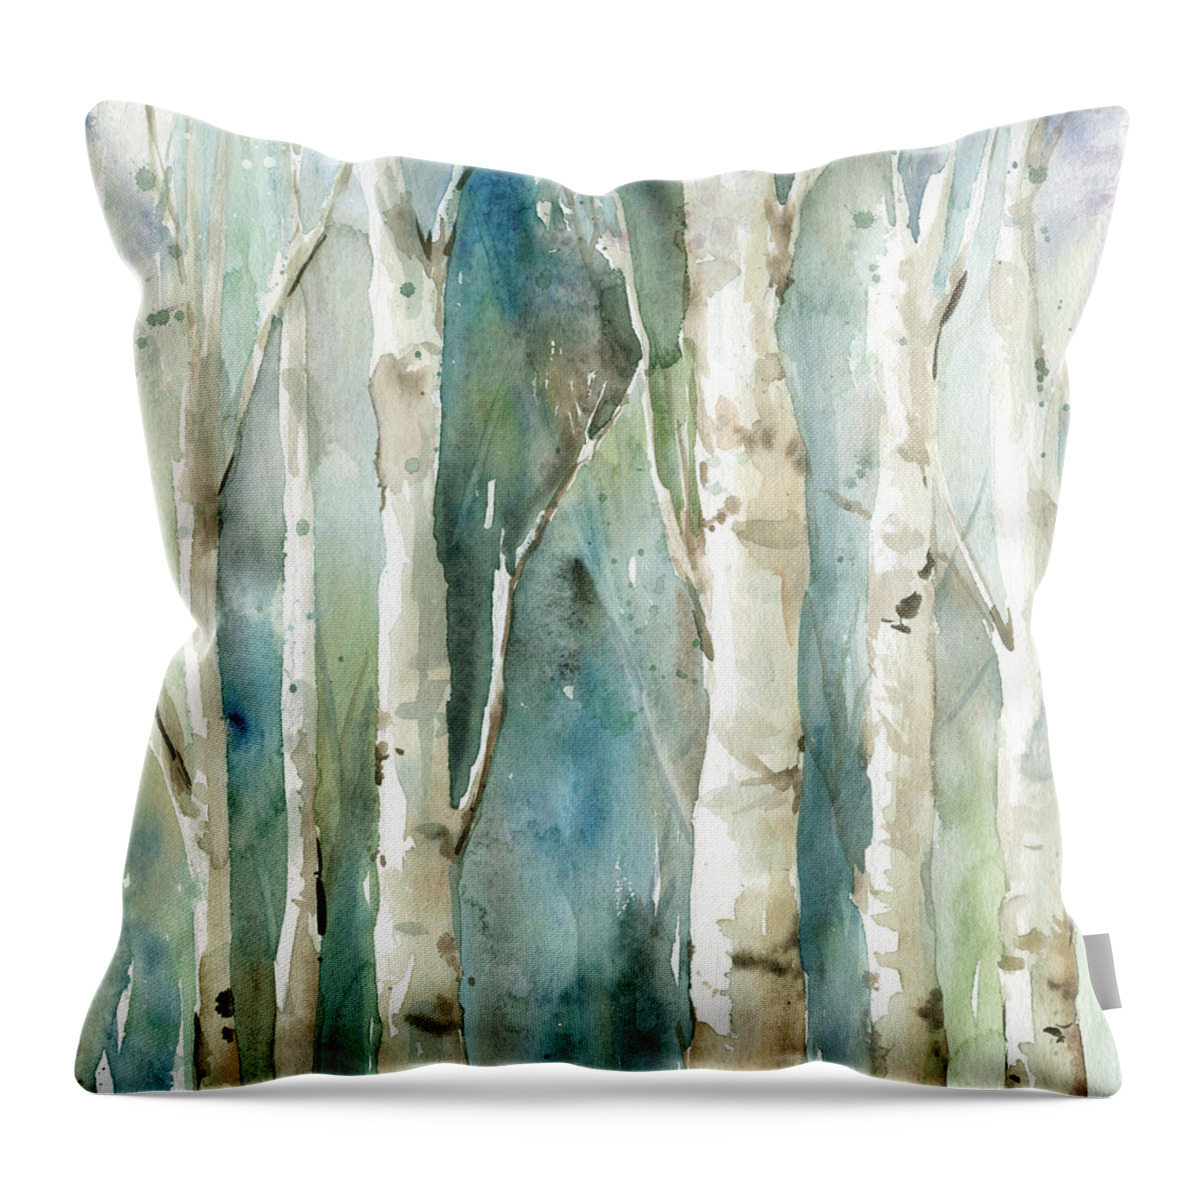 Contemporary Watercolor Birch Trees Washy Teals Greens Tan Throw Pillow featuring the painting Watery Birch 1 by Carol Robinson